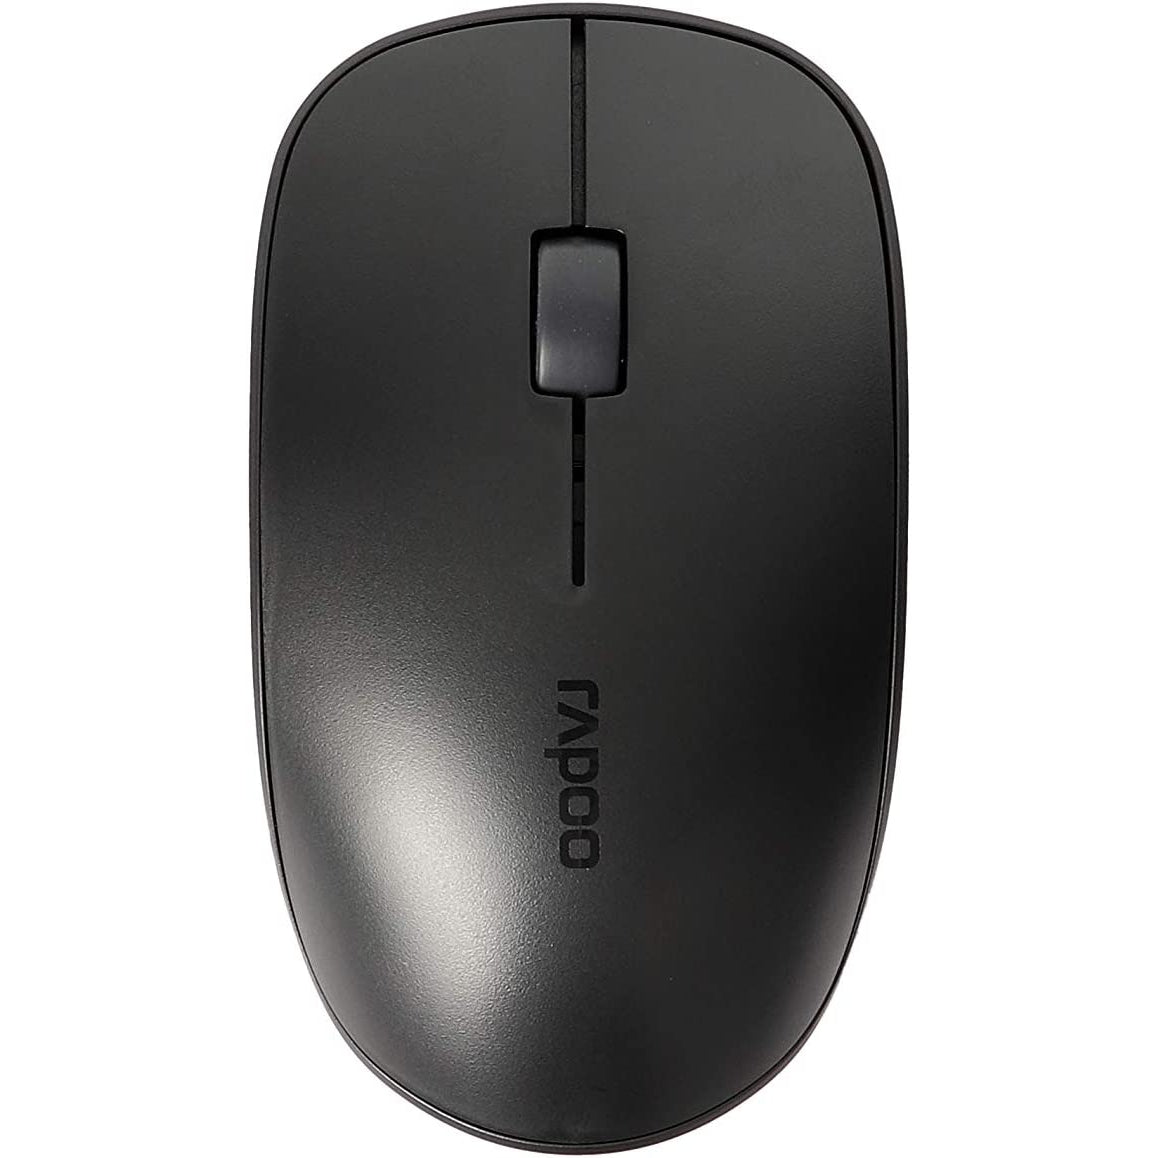 Rapoo M200 Silent Wireless Mouse - Black - Refurbished Excellent